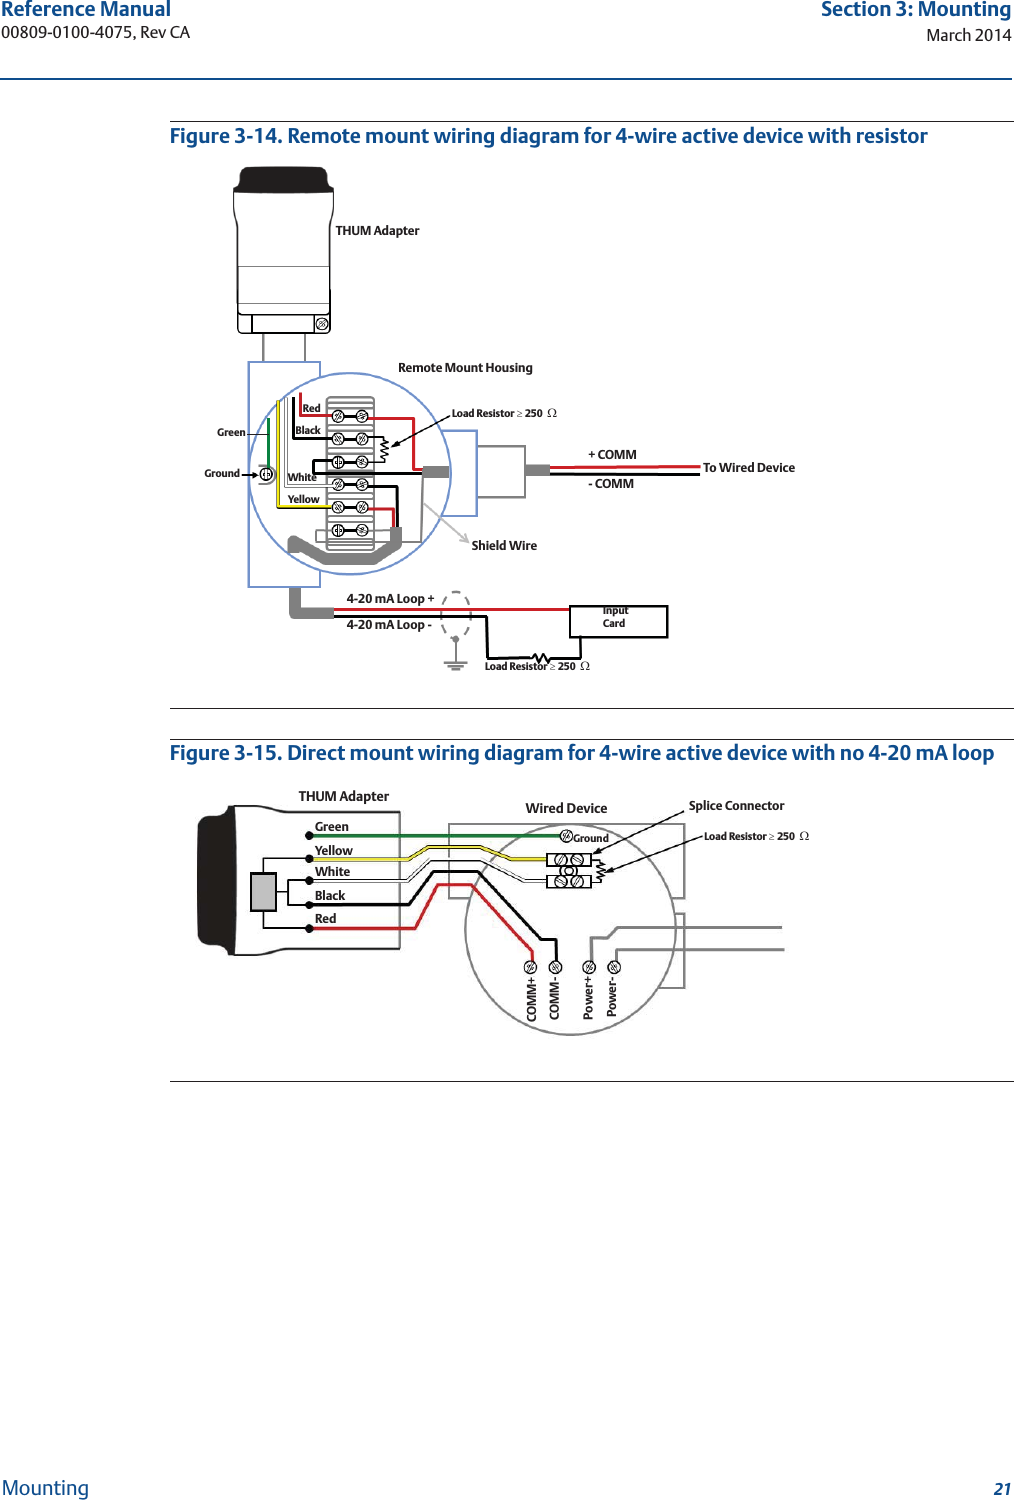 21Reference Manual 00809-0100-4075, Rev CASection 3: MountingMarch 2014MountingFigure 3-14. Remote mount wiring diagram for 4-wire active device with resistorFigure 3-15. Direct mount wiring diagram for 4-wire active device with no 4-20 mA loopRemote Mount Housing4-20 mA Loop -4-20 mA Loop +Ground+ COMM- COMMTHUM AdapterGreenWhiteBlackRedTo Wired DeviceYellowShield WireLoad Resistor t250 :Load Resistor t250 :Input CardSplice ConnectorWired Device GroundTHUM AdapterGreenYellowWhiteBlackRedLoad Resistor t250 :Power+Power-COMM+COMM-